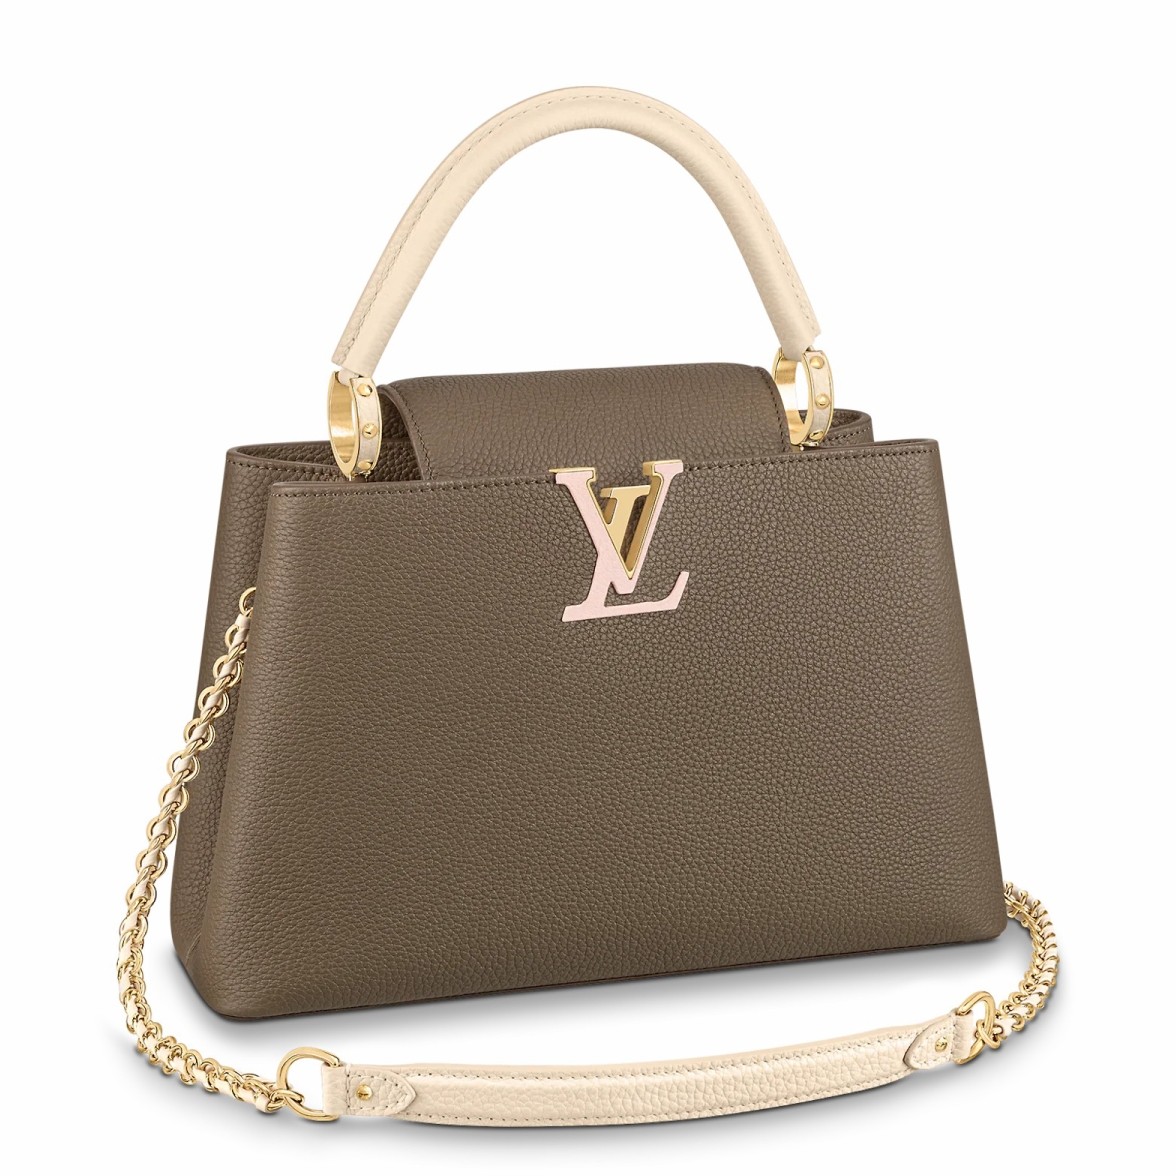 Replica Louis Vuitton Capucines MM Bag with Chain Braided Leather Strap  M59516